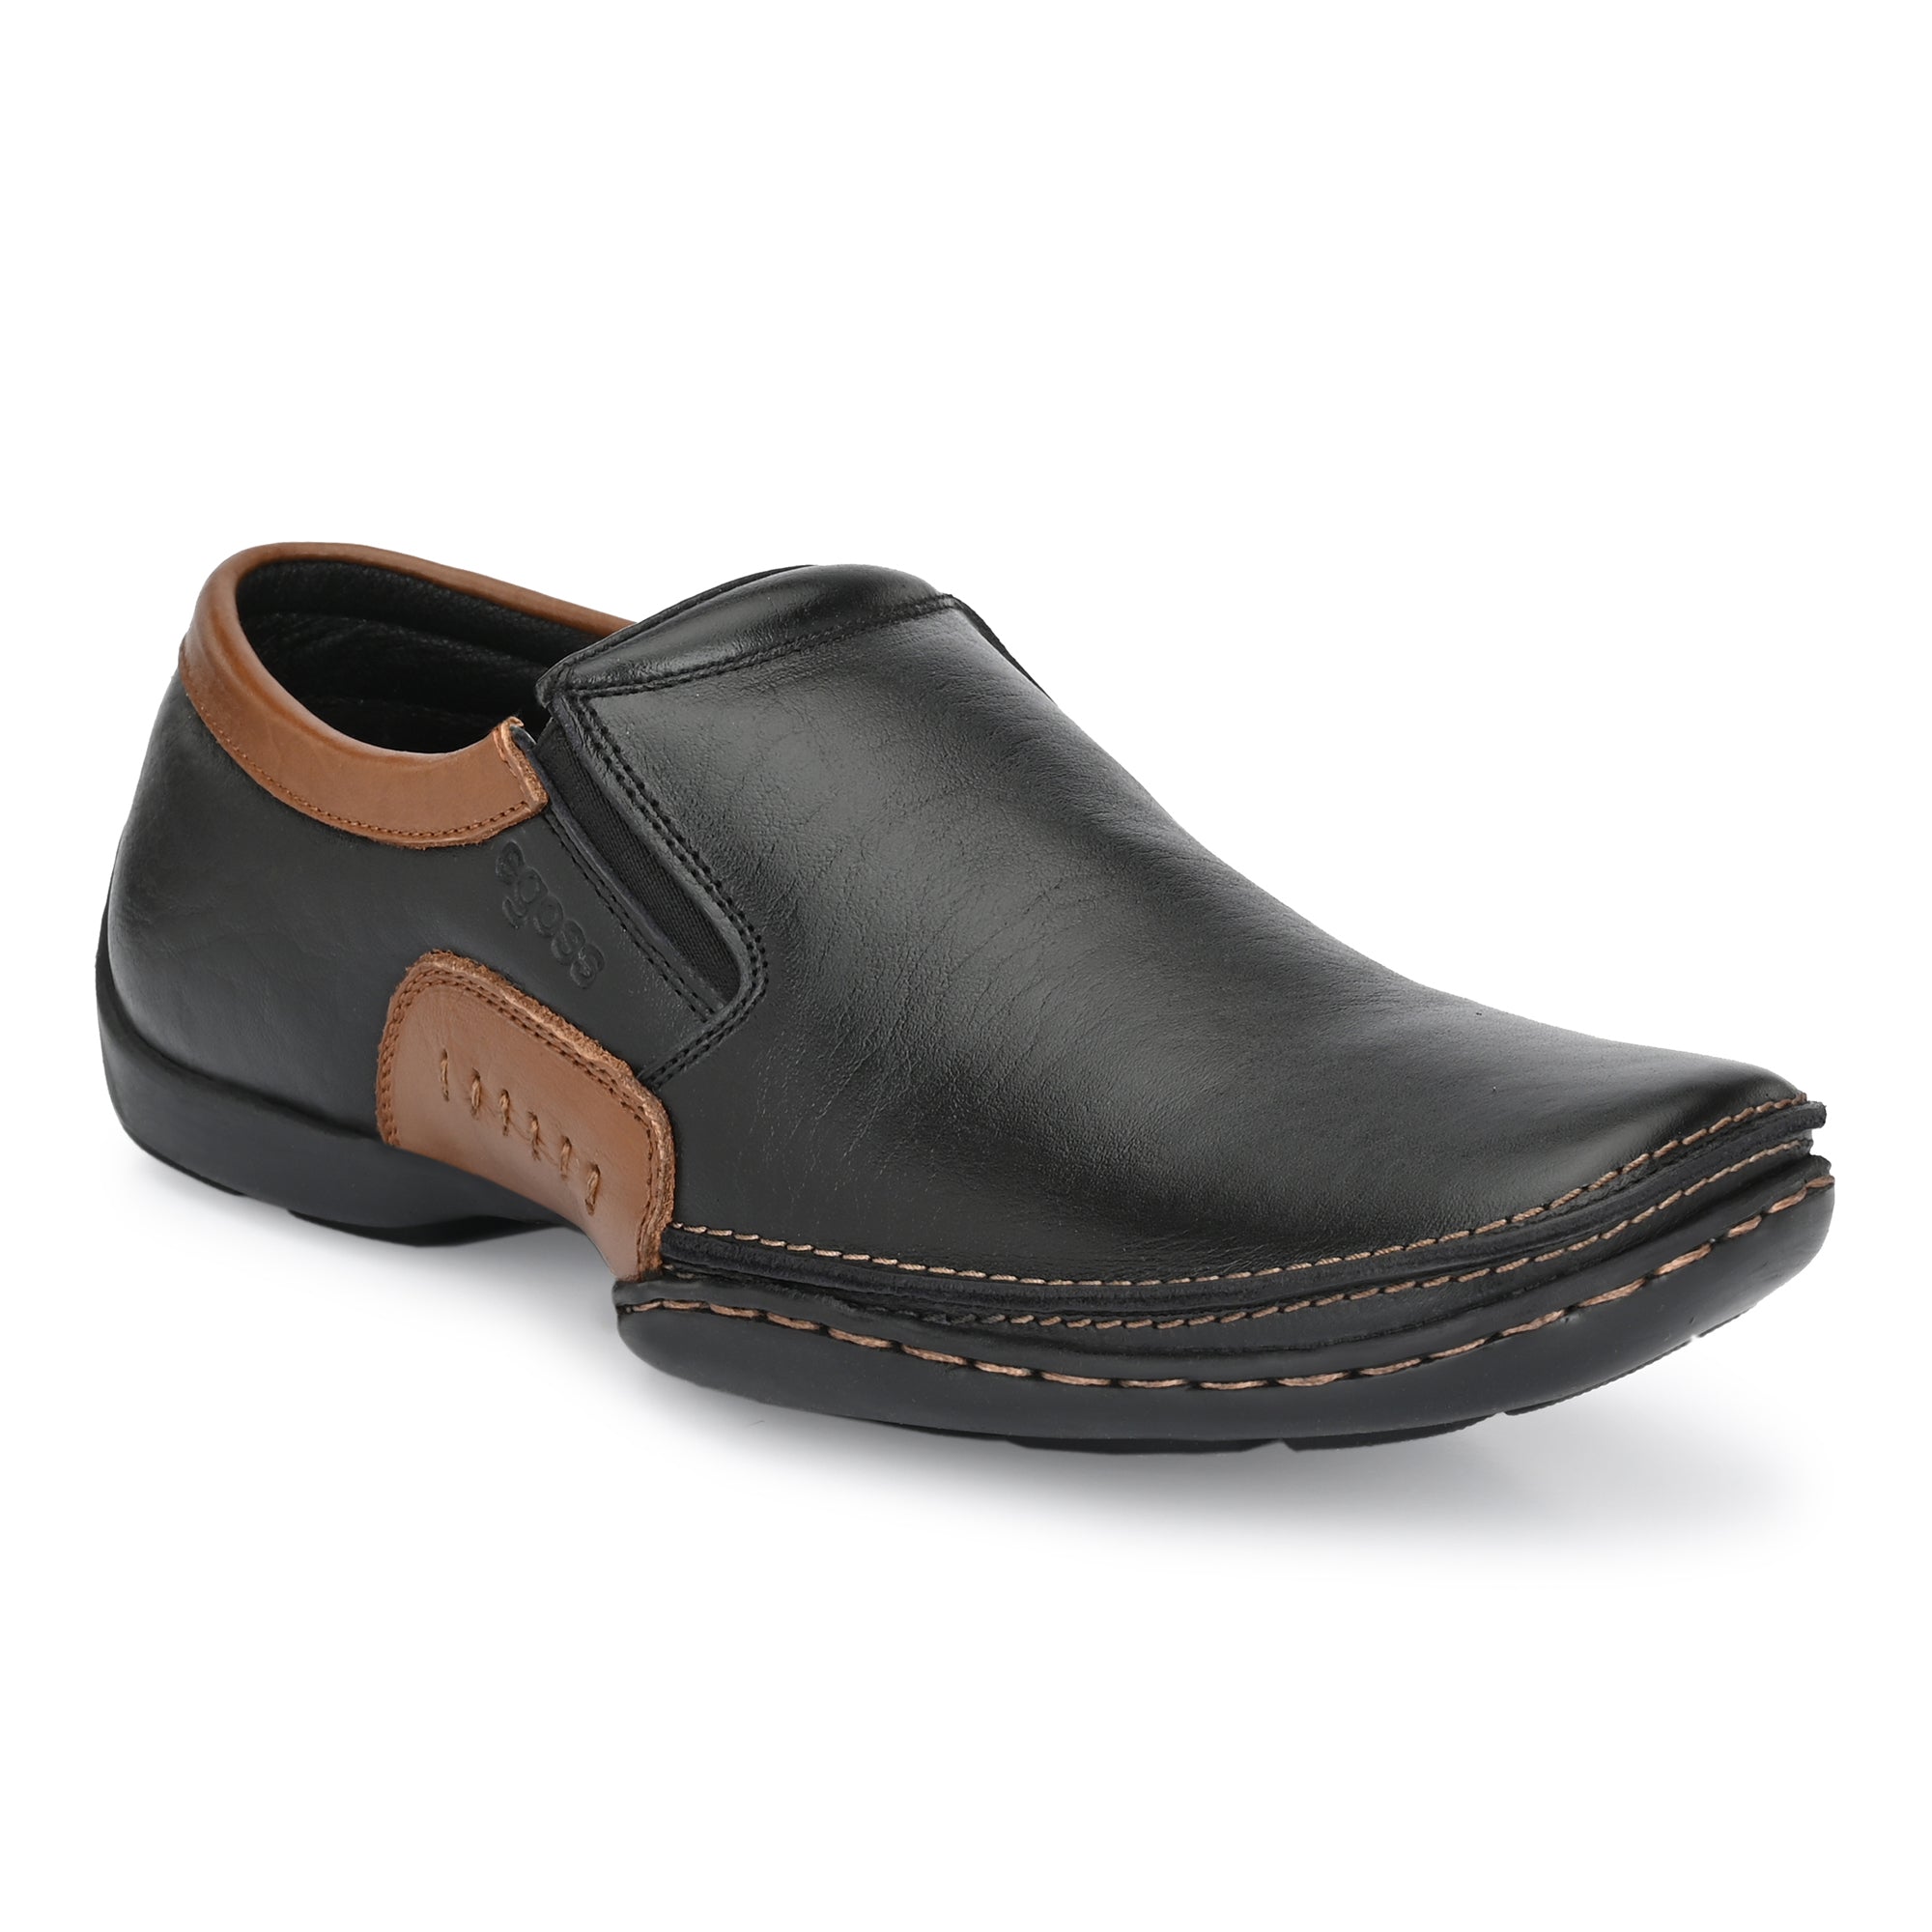 Egoss Casual Shoes For Men - Shoes for men Leather Casual